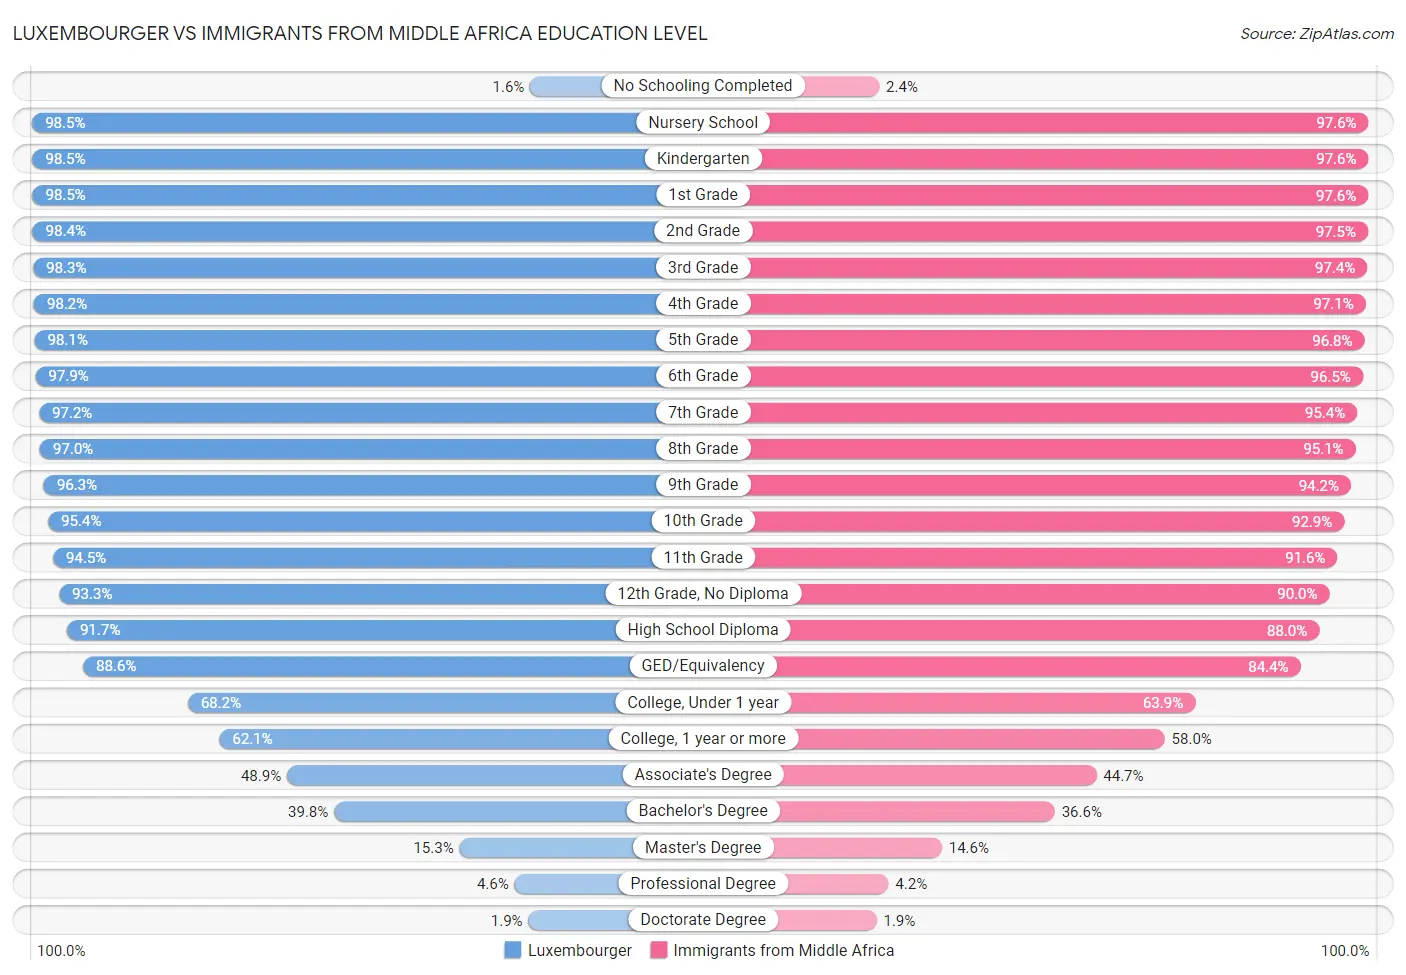 Luxembourger vs Immigrants from Middle Africa Education Level